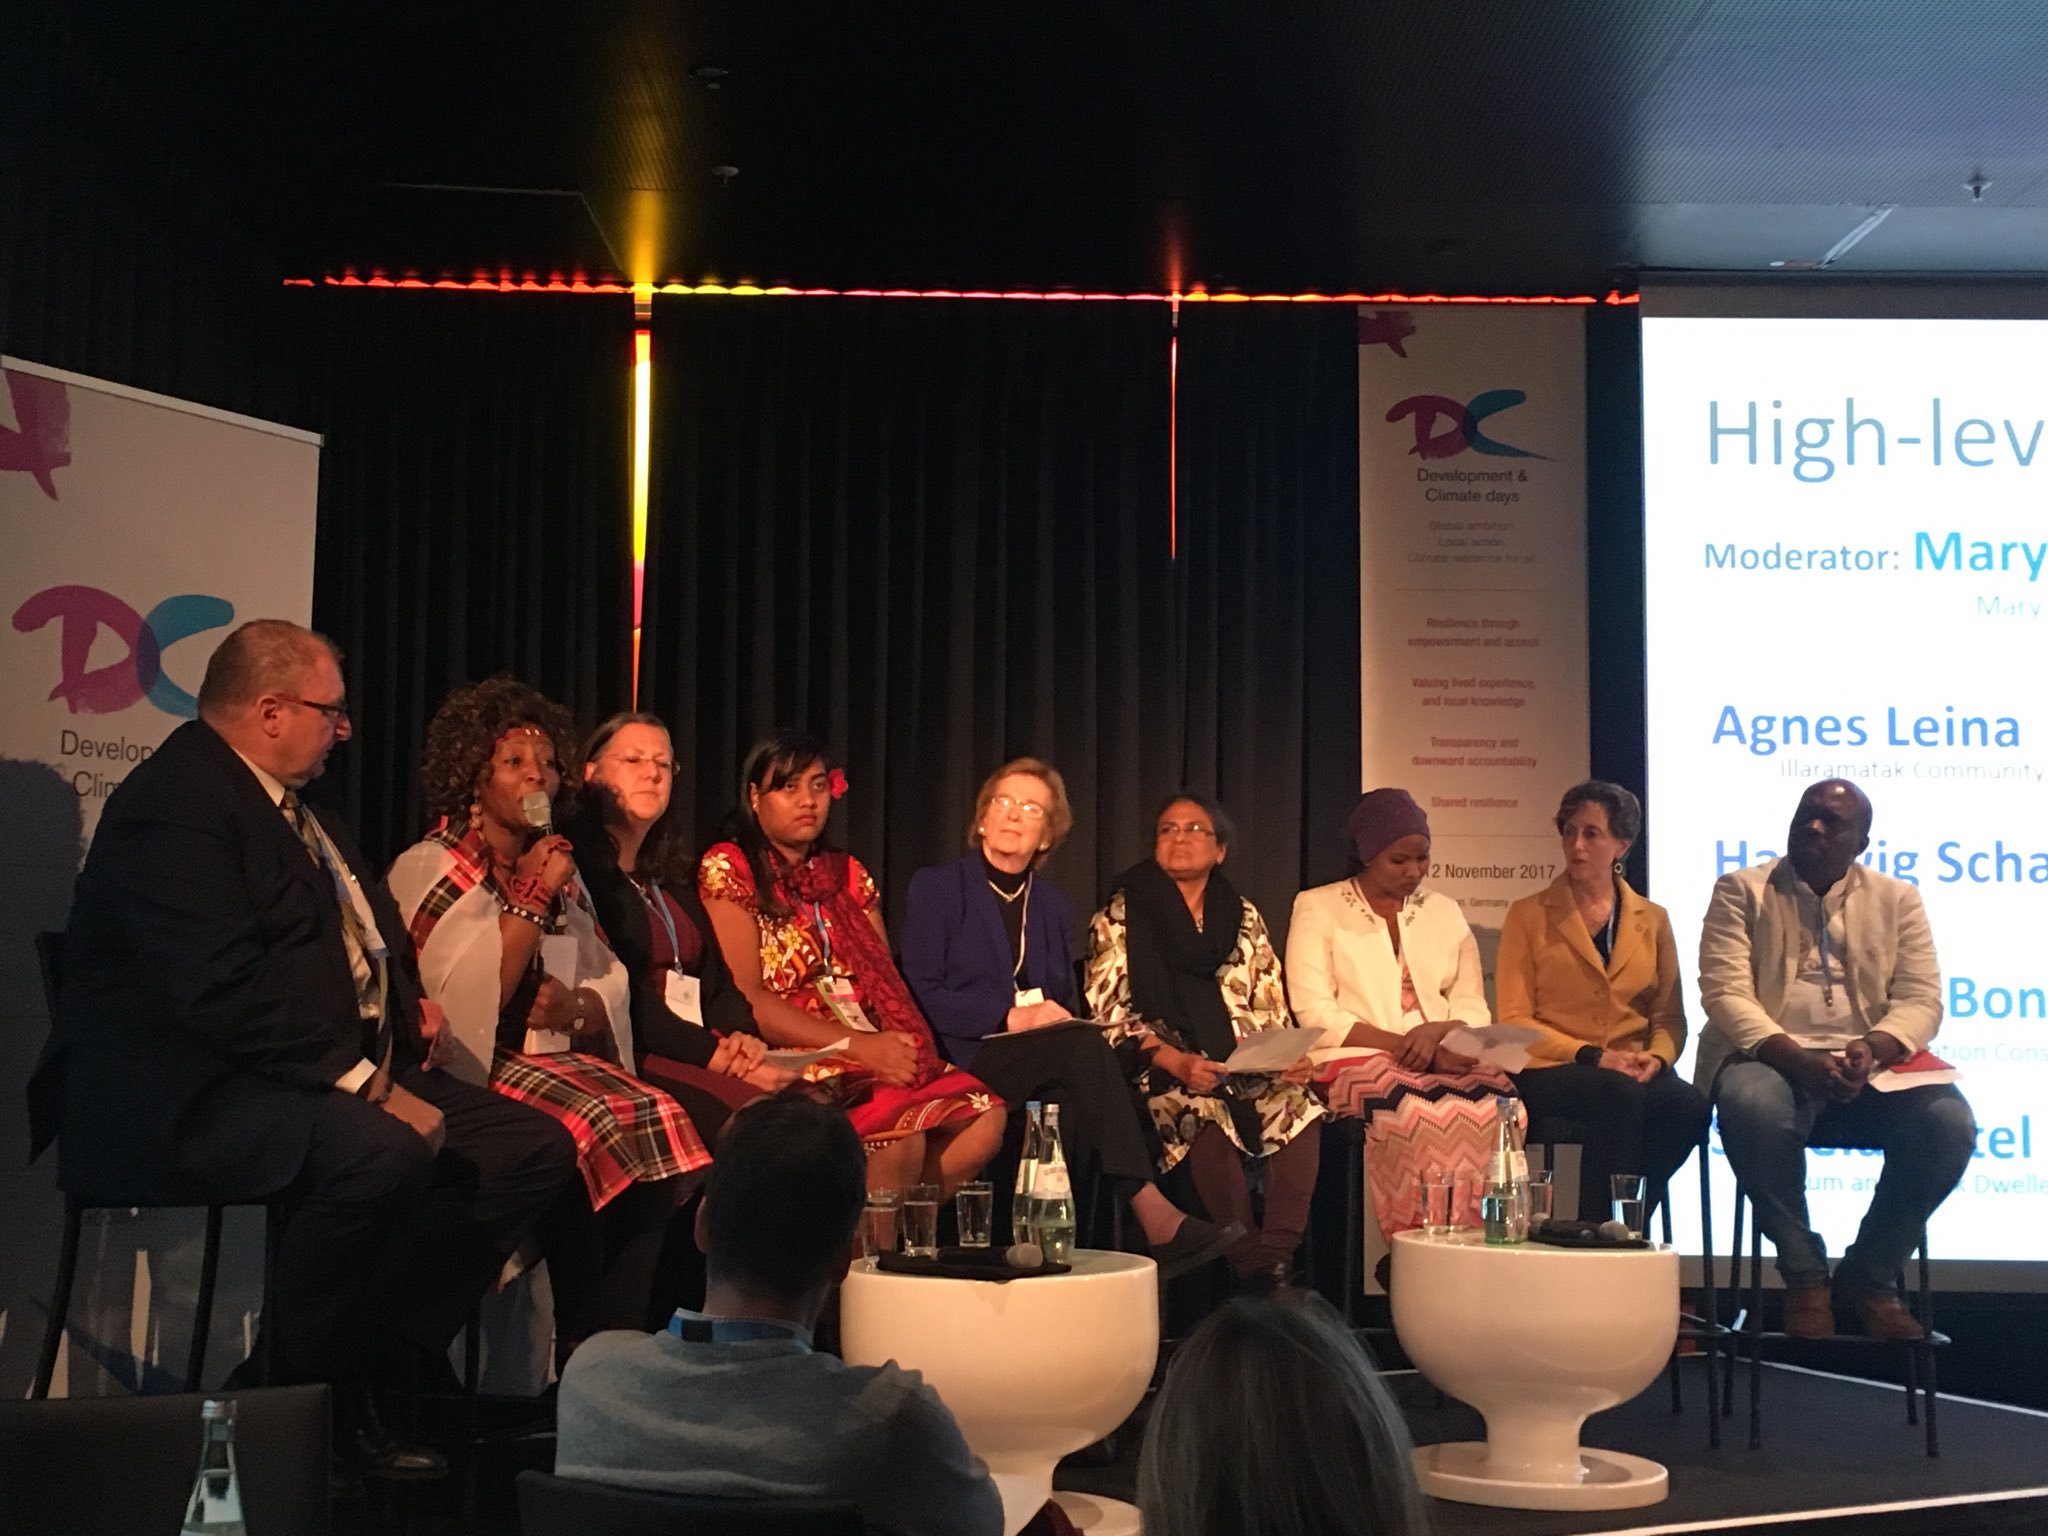 Agnes Leina calls for women being given voice in policy decisions at end of #DCdays17 on a panel of women & 2 men, majority from south. https://t.co/XfigXisae7